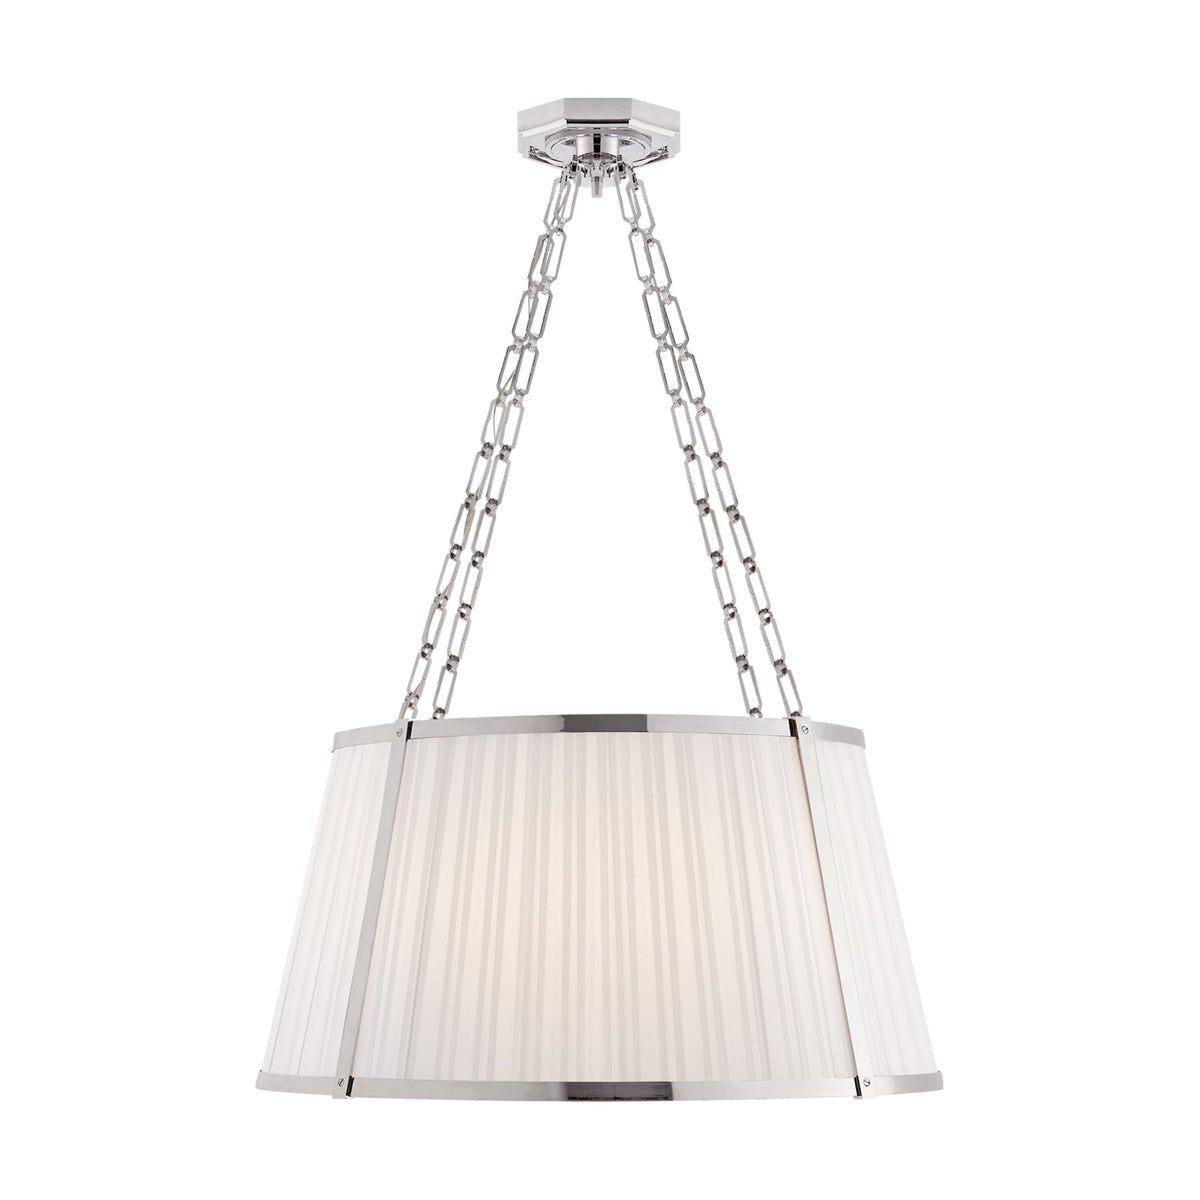 WINDSOR LARGE HANGING SHADE IN POLISHED NICKEL WITH BOXPLEAT SILK SHADE